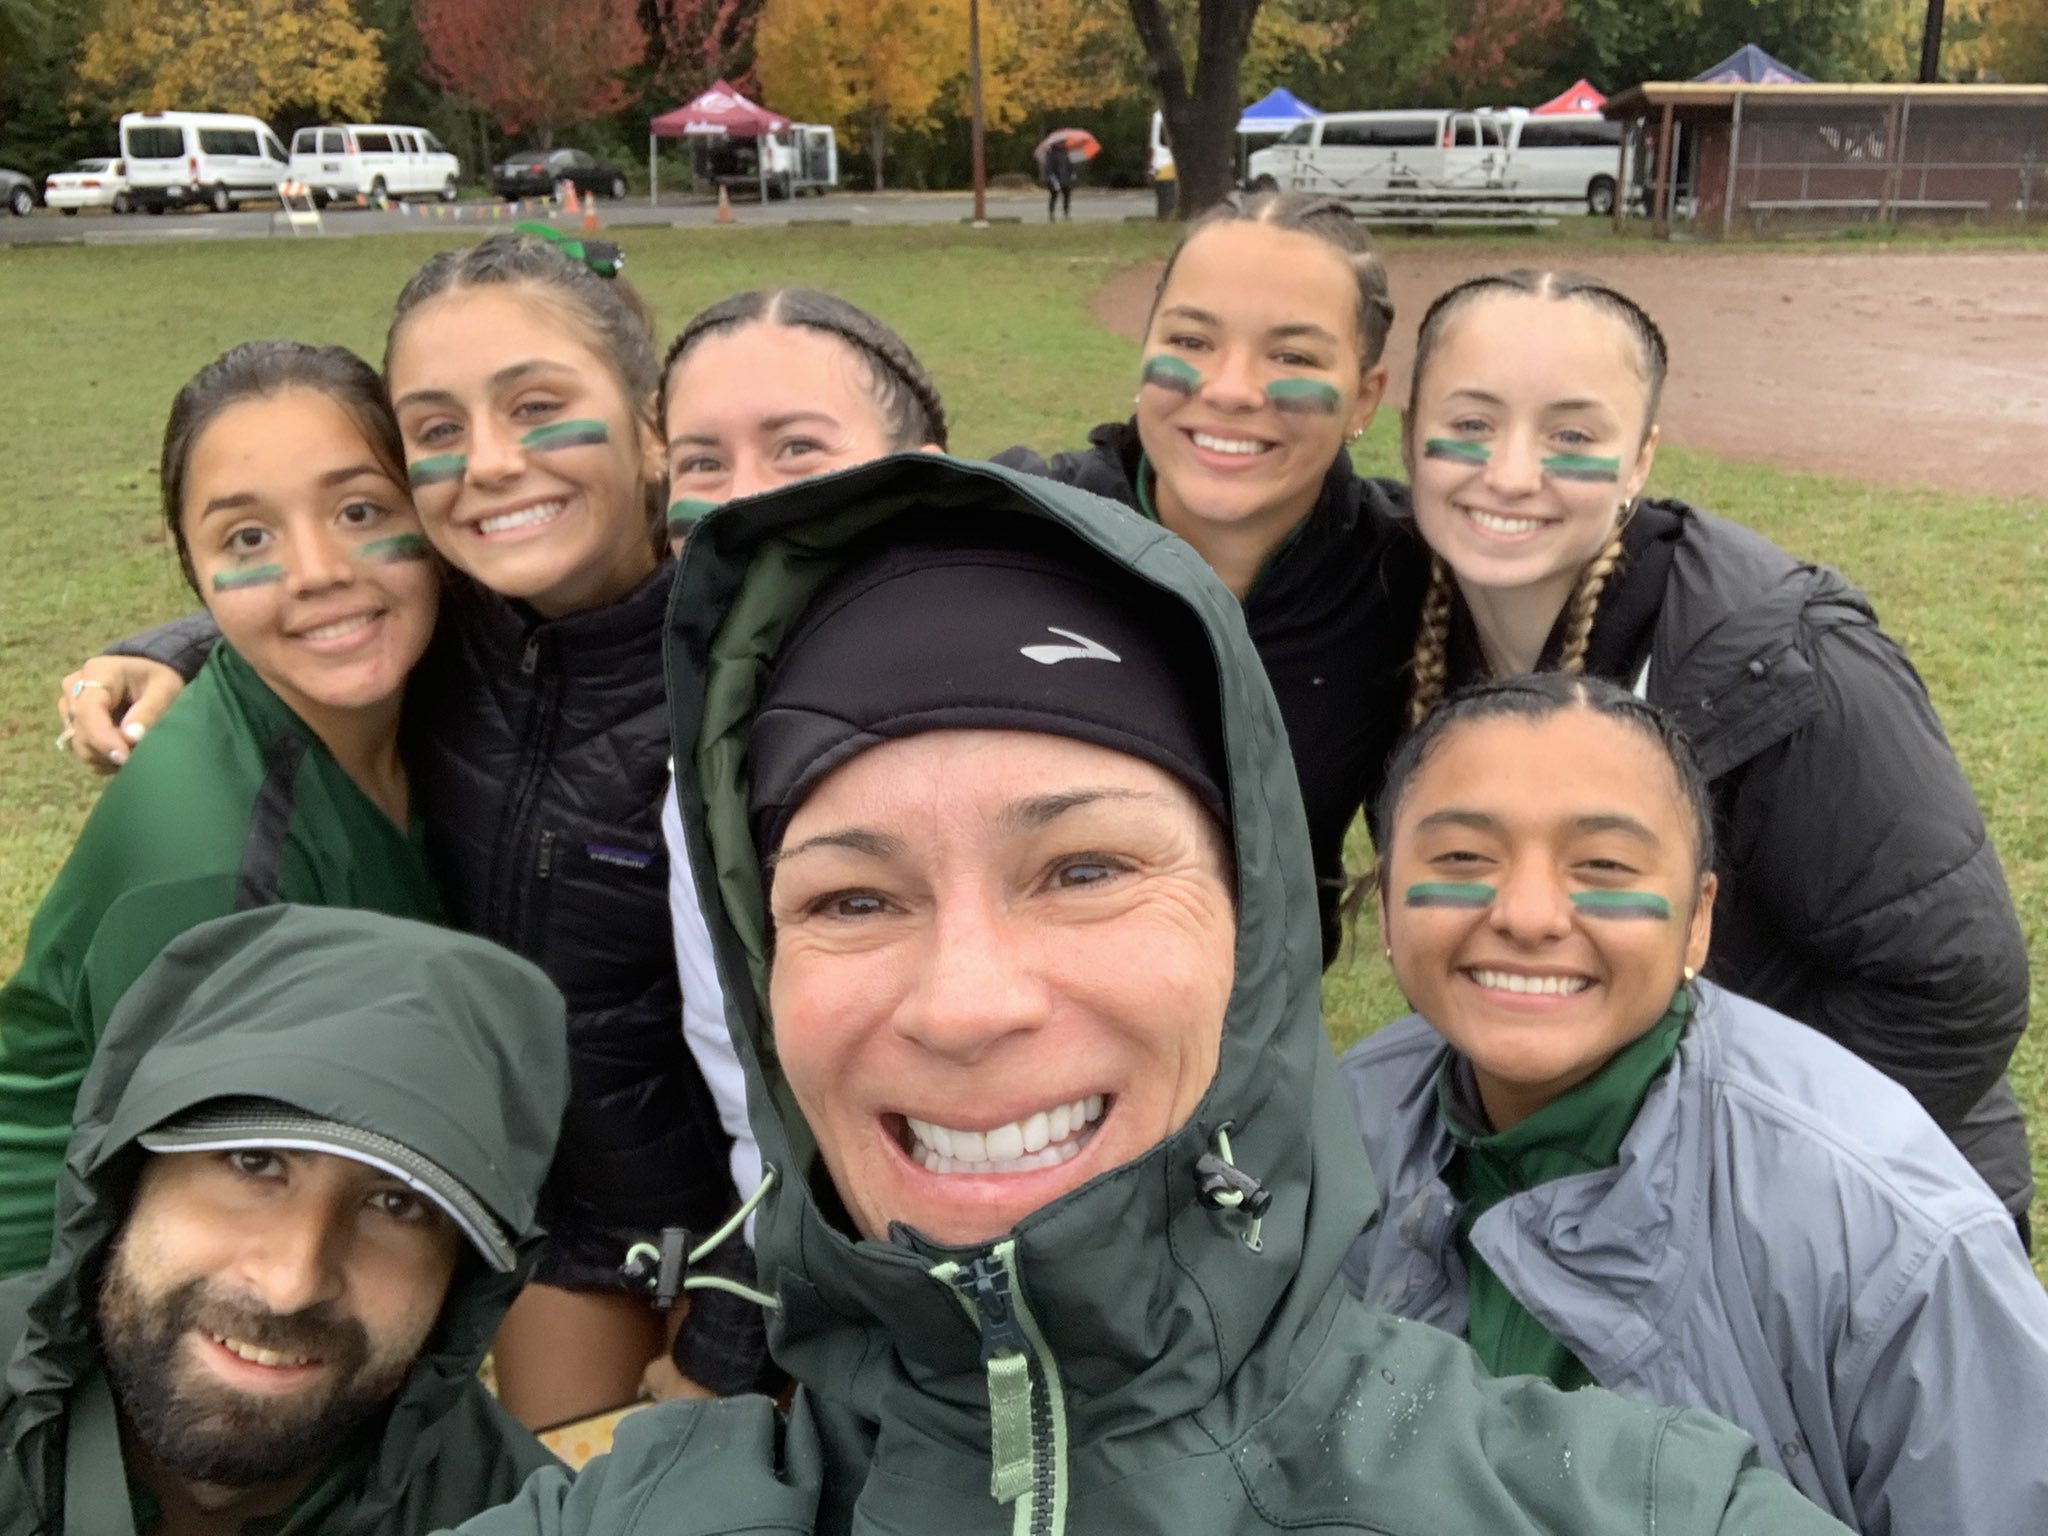 Women's Cross Country finishes in 6th place at NorCal Championships, advance to State Championships